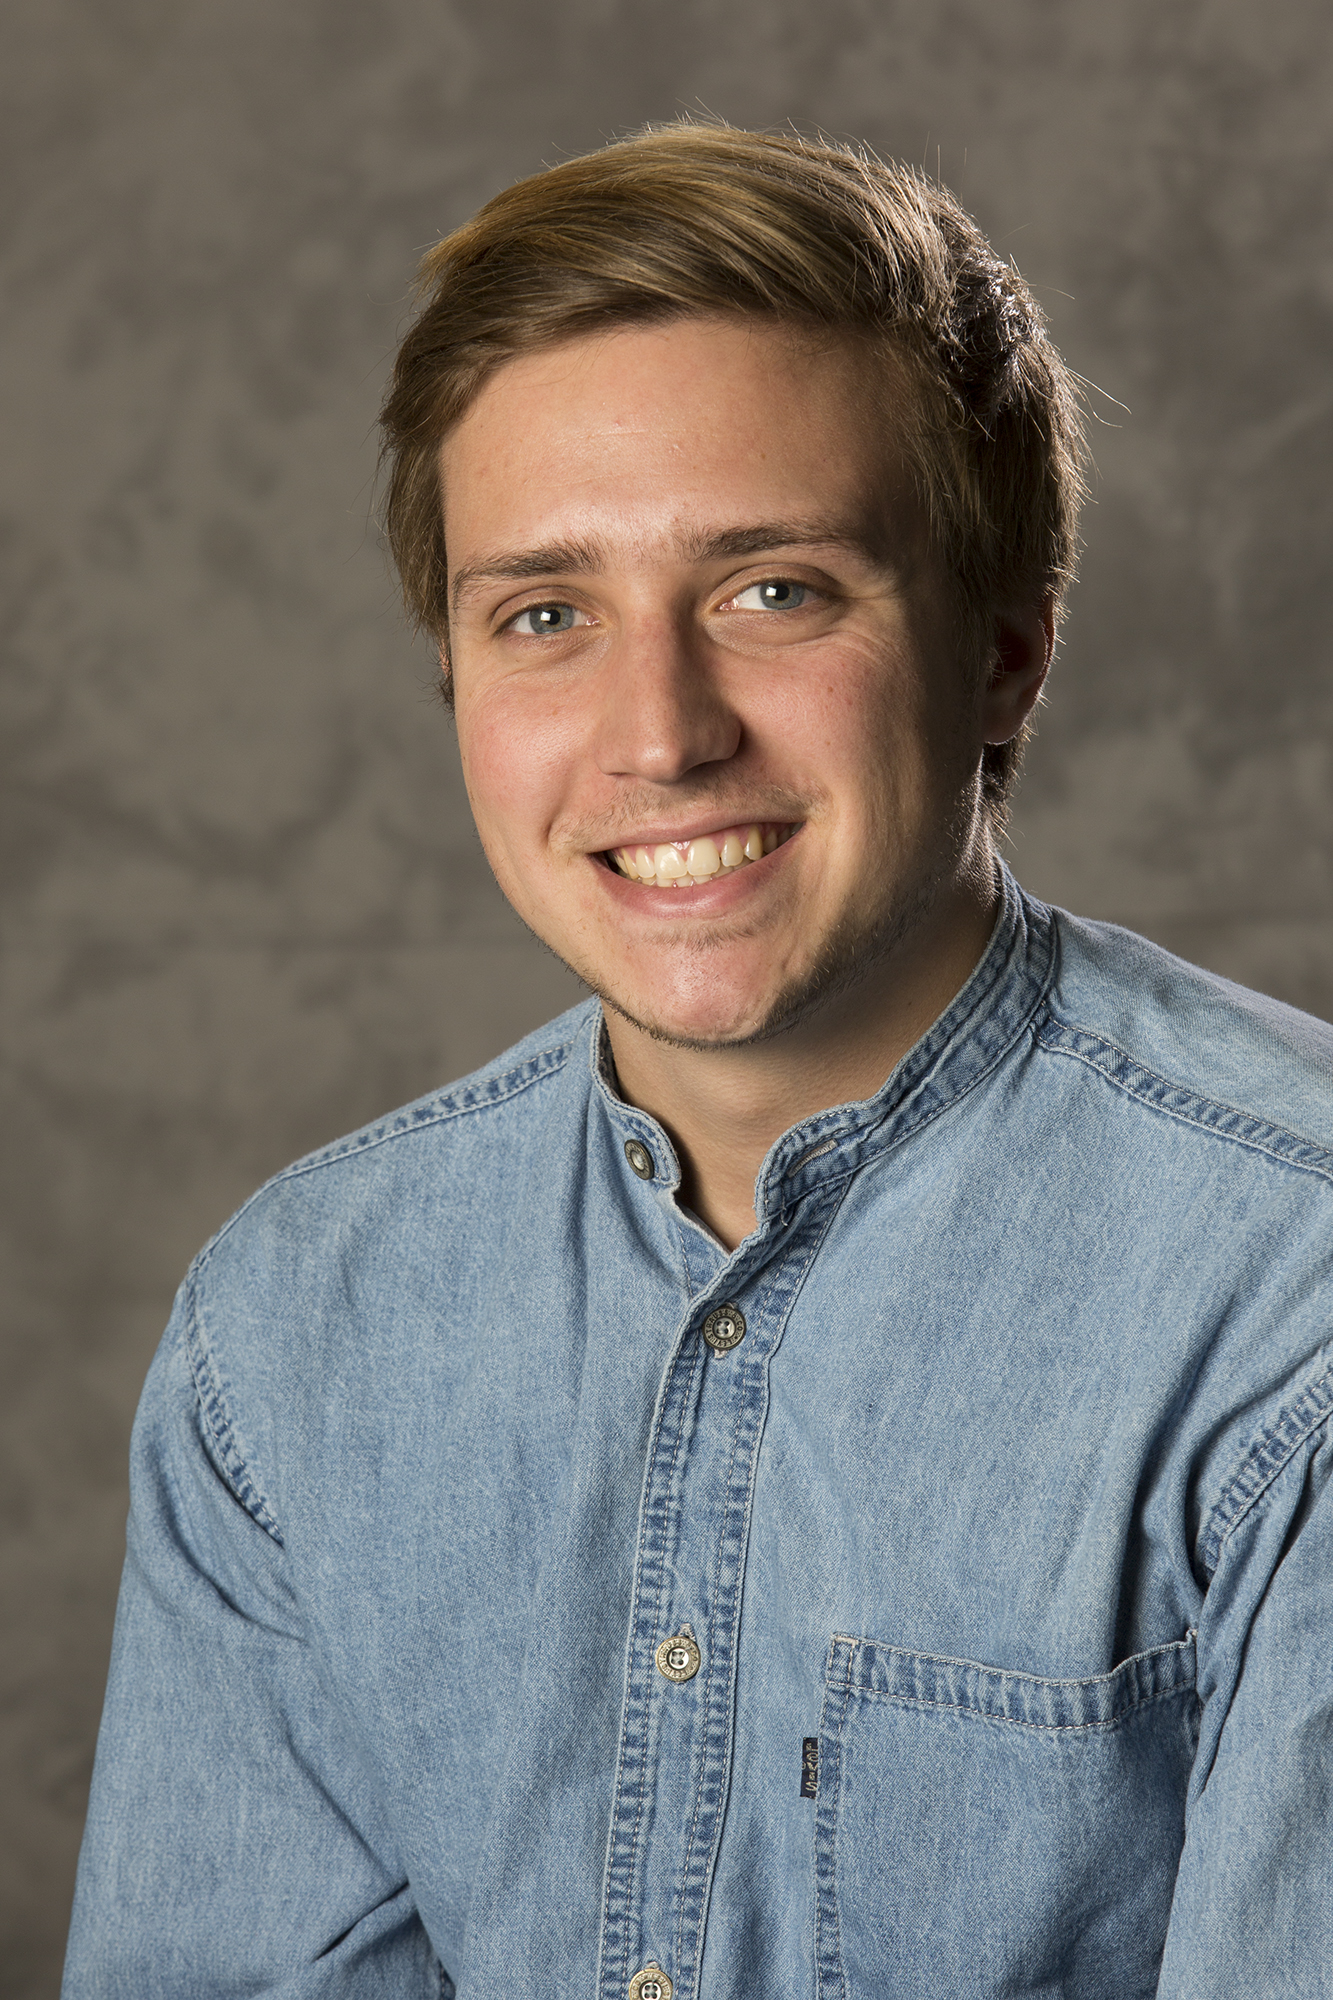 Chris Bowling won fifth place in the 2017-2018 Hearst Enterprise Reporting competition.